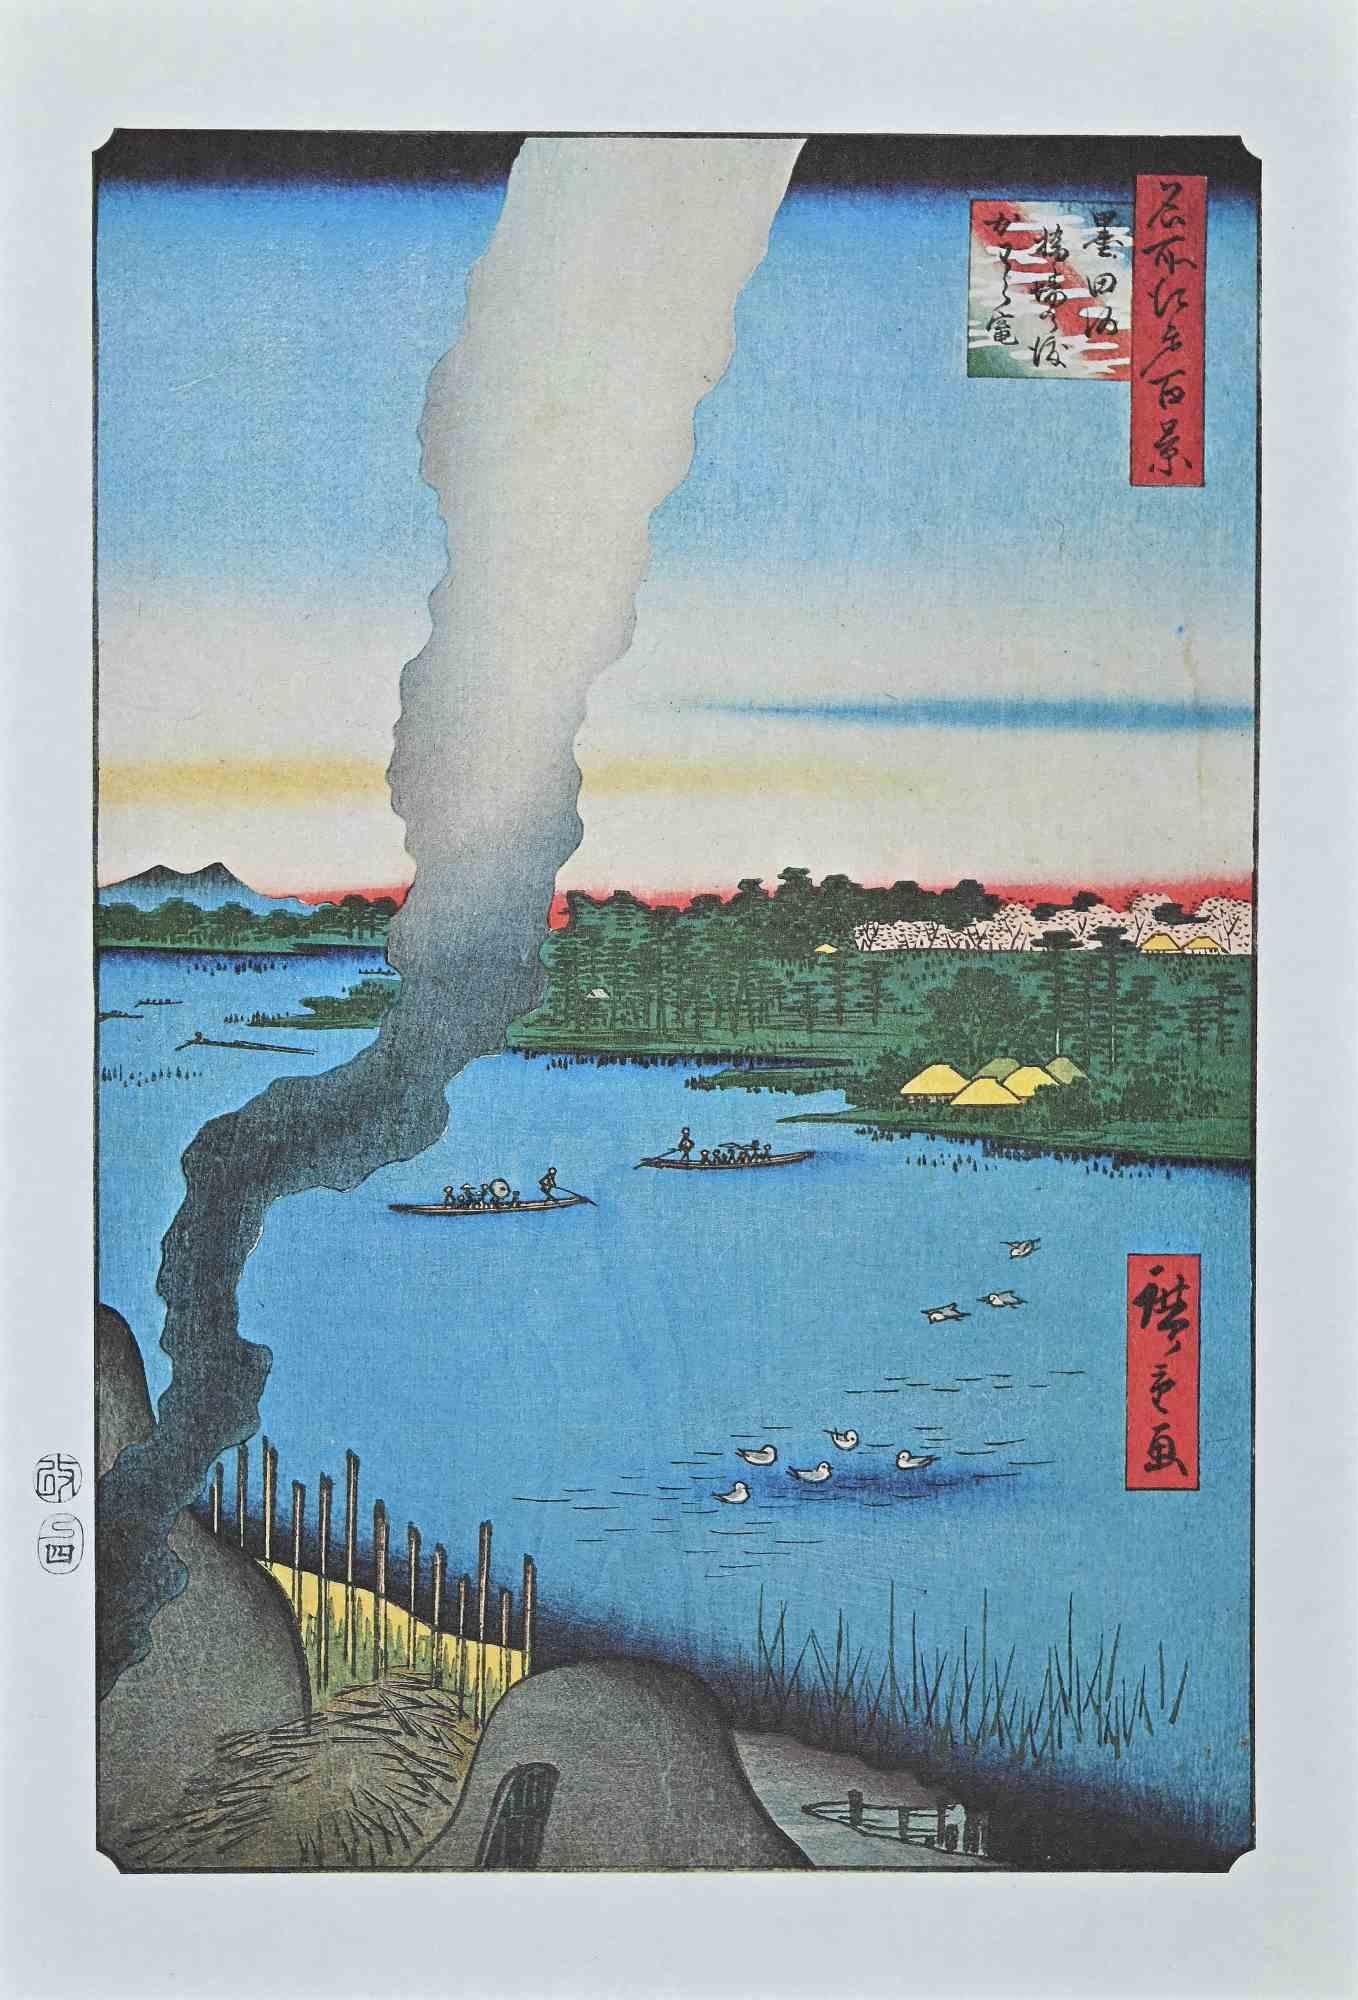 Tile Kilns and Hashiba Ferry, Sumida River is a modern artwork realized in the mid-20th century after Utagawa Hiroshige.

Mixed colored lithograph after a woodcut realized by Utagawa Hiroshige in 1857 and from the series "Meisho Edo Hyakkei" ("One